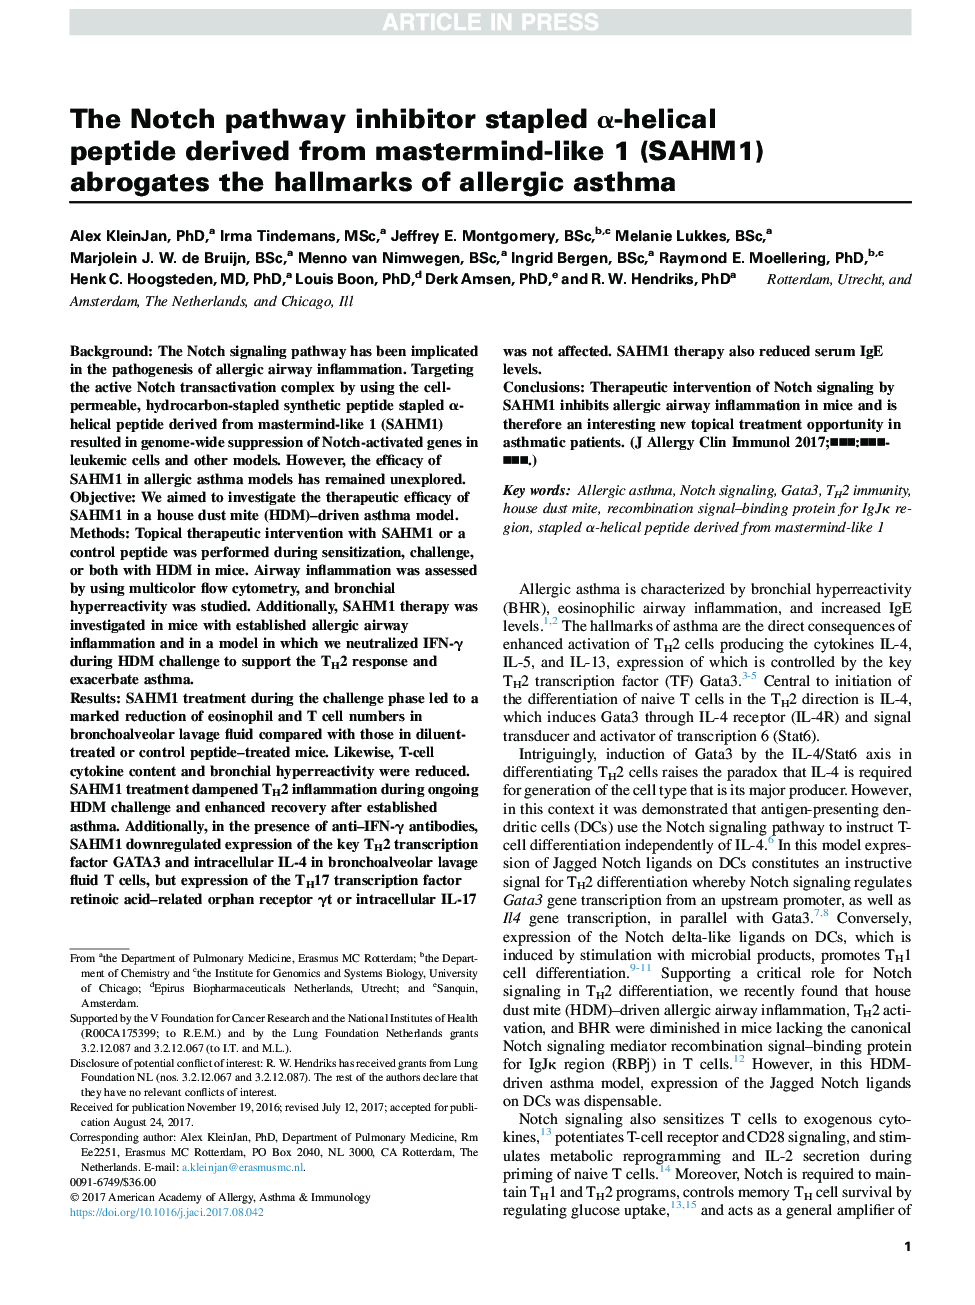 The Notch pathway inhibitor stapled Î±-helical peptide derived from mastermind-like 1 (SAHM1) abrogates the hallmarks of allergic asthma